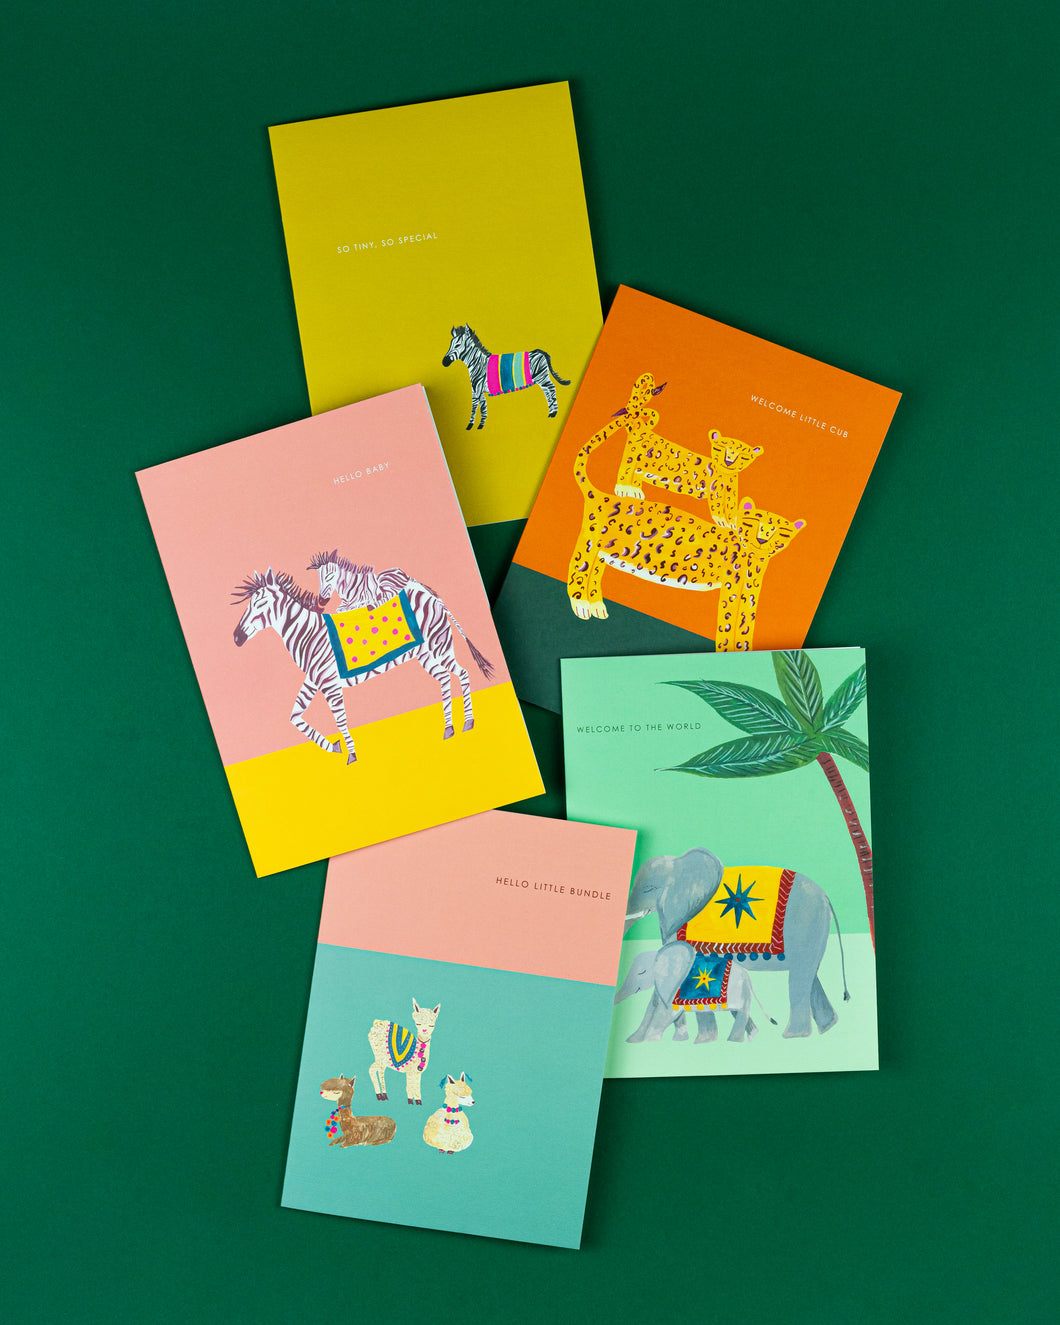 The New Baby Card Bundle Includes 5 best selling Greetings Cards